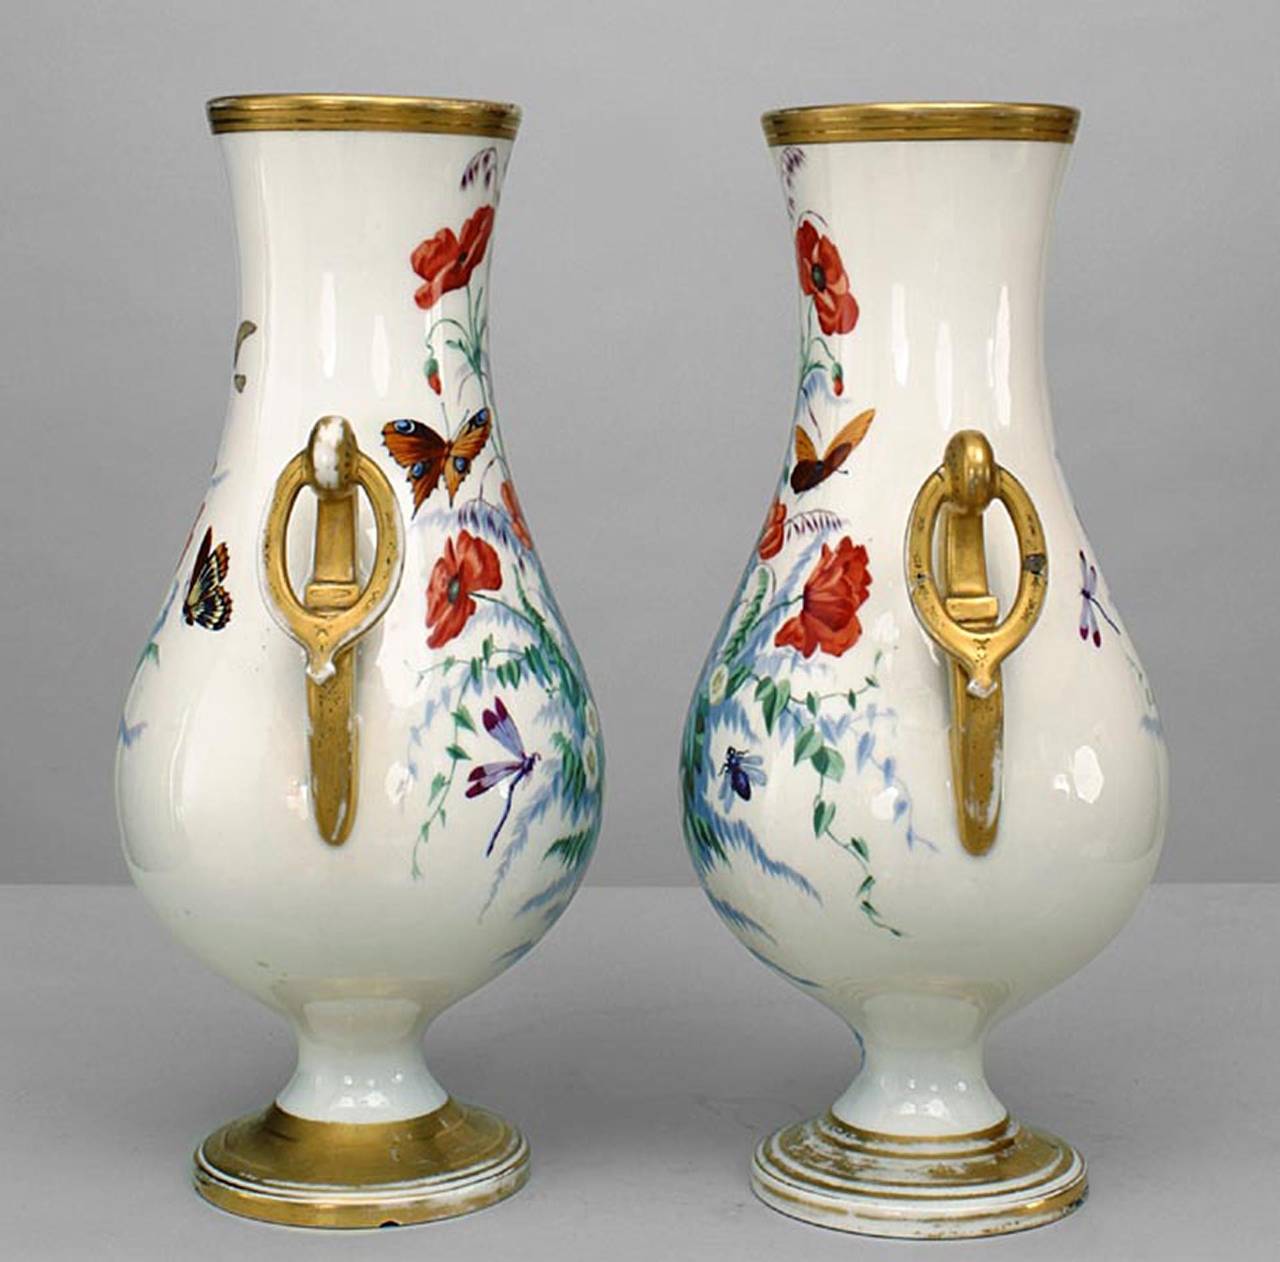 Painted Pair of 19th c. French Decorated White & Gold Porcelain Vases